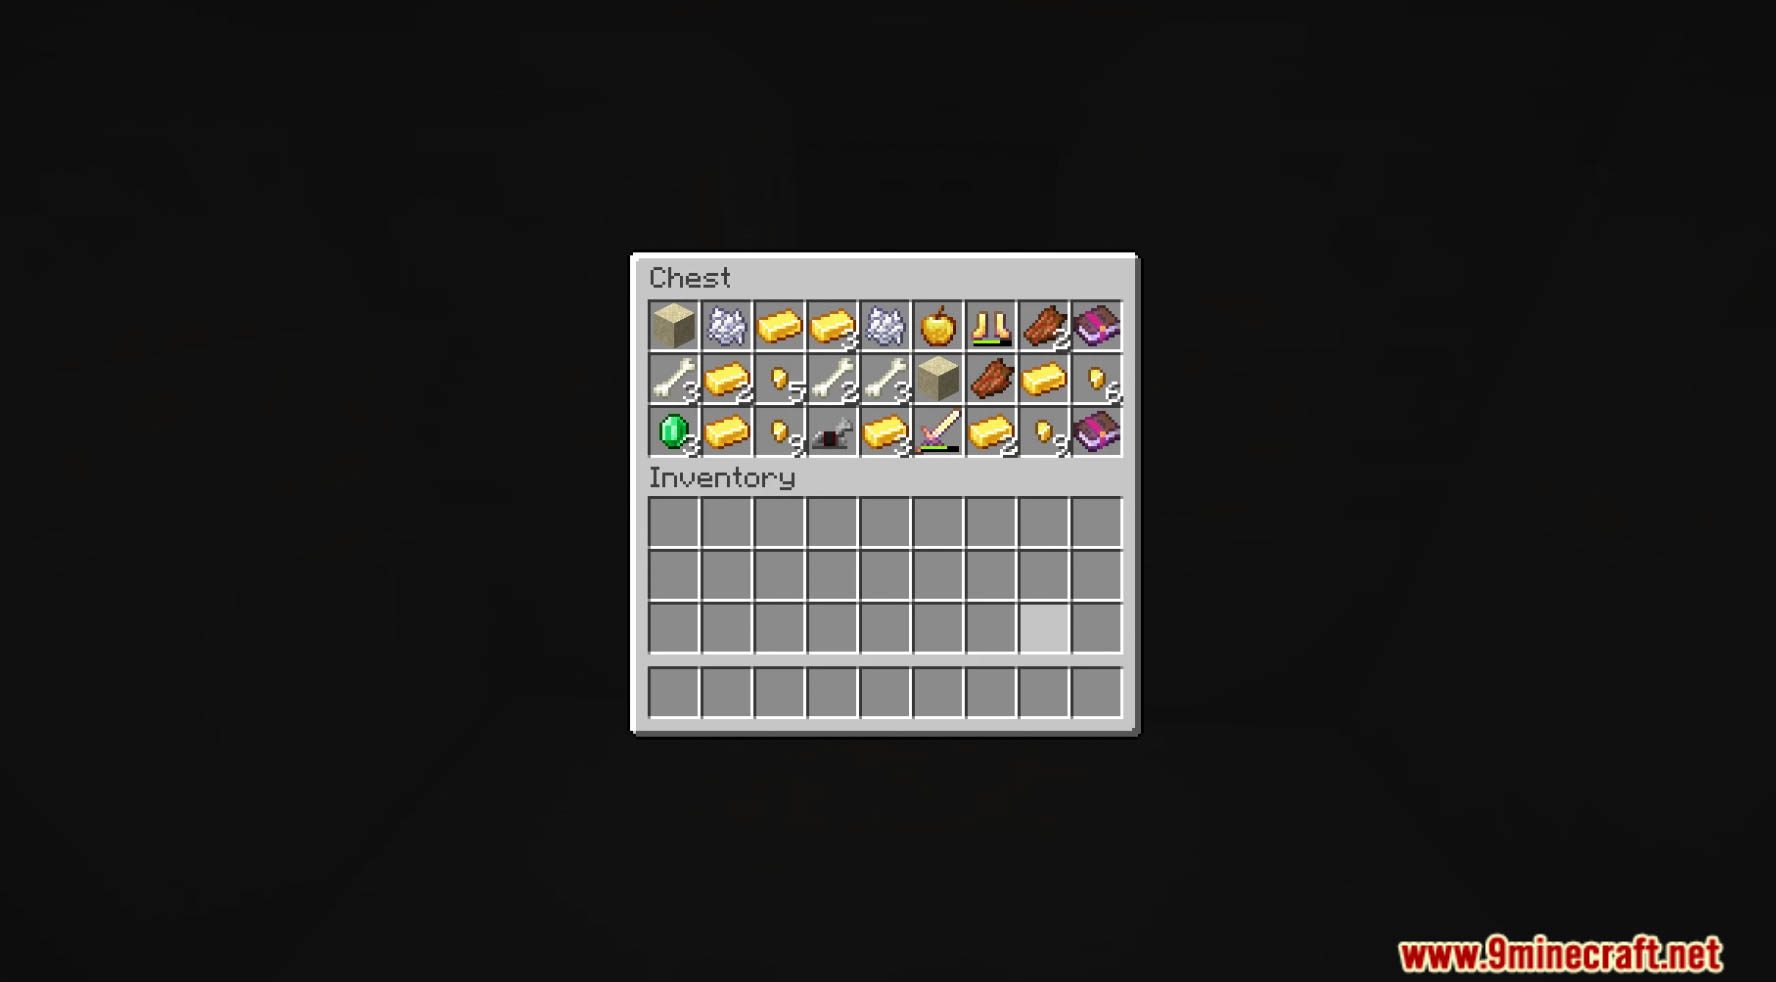 More Loot Data Pack (1.20.4, 1.19.4) - Unleash a World of Exciting Treasures! 8